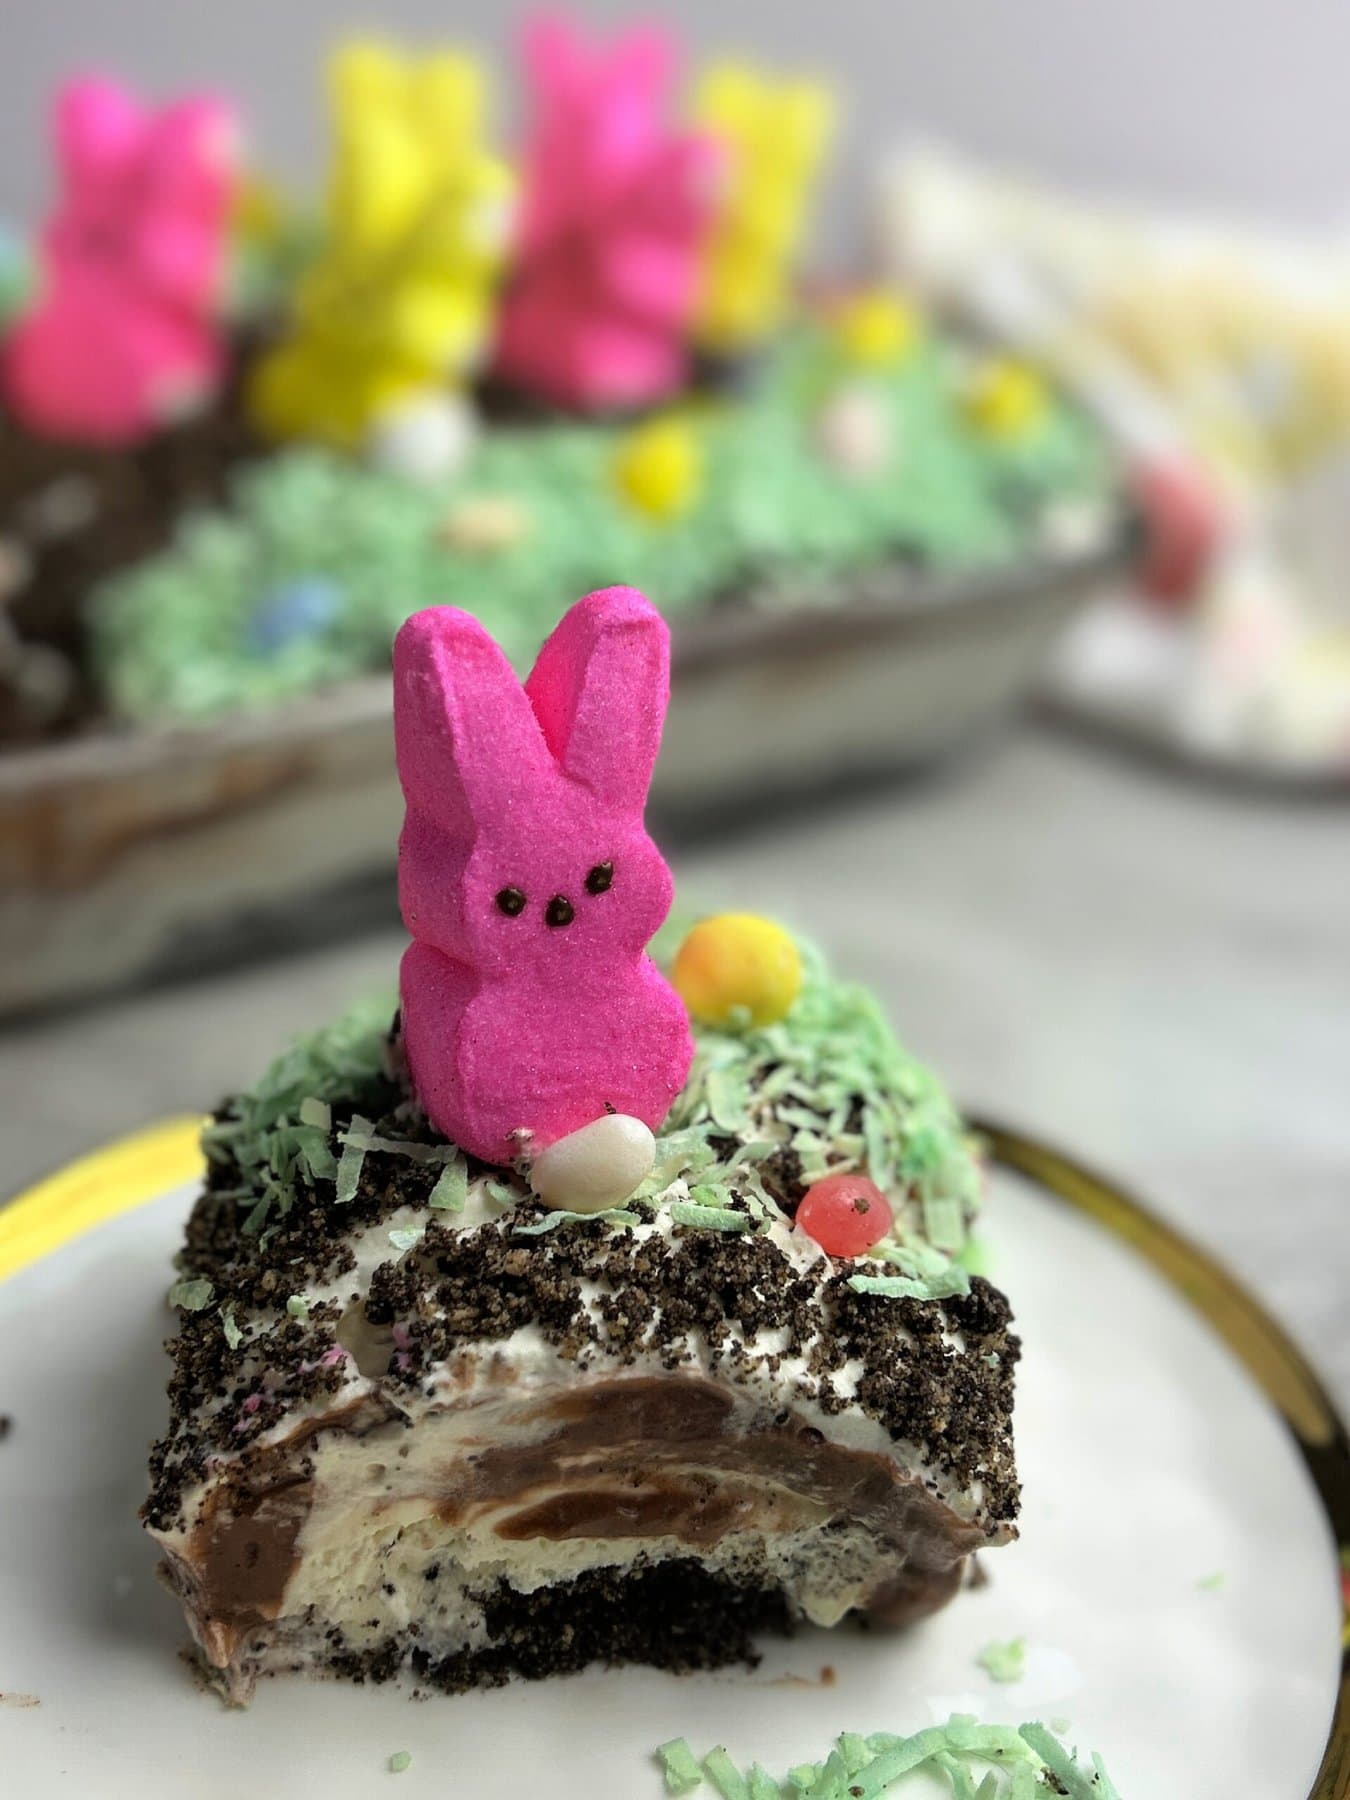 A slice of cake decorated with a pink marshmallow bunny and pastel sprinkles on a white background.